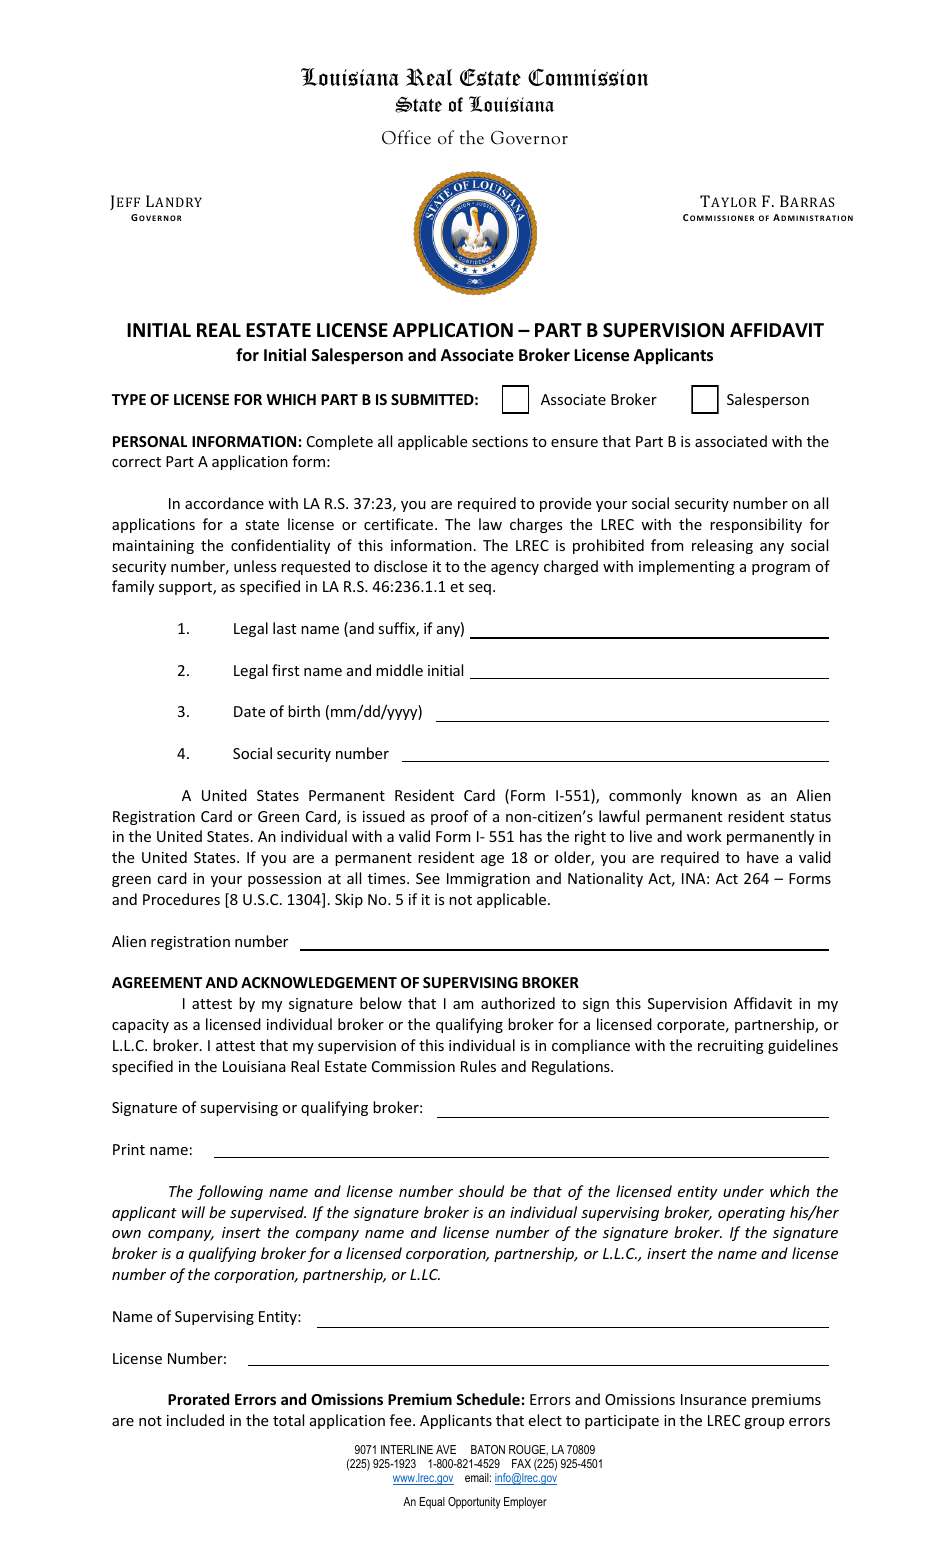 Part B Initial Real Estate License Application - Supervision Affidavit - Louisiana, Page 1